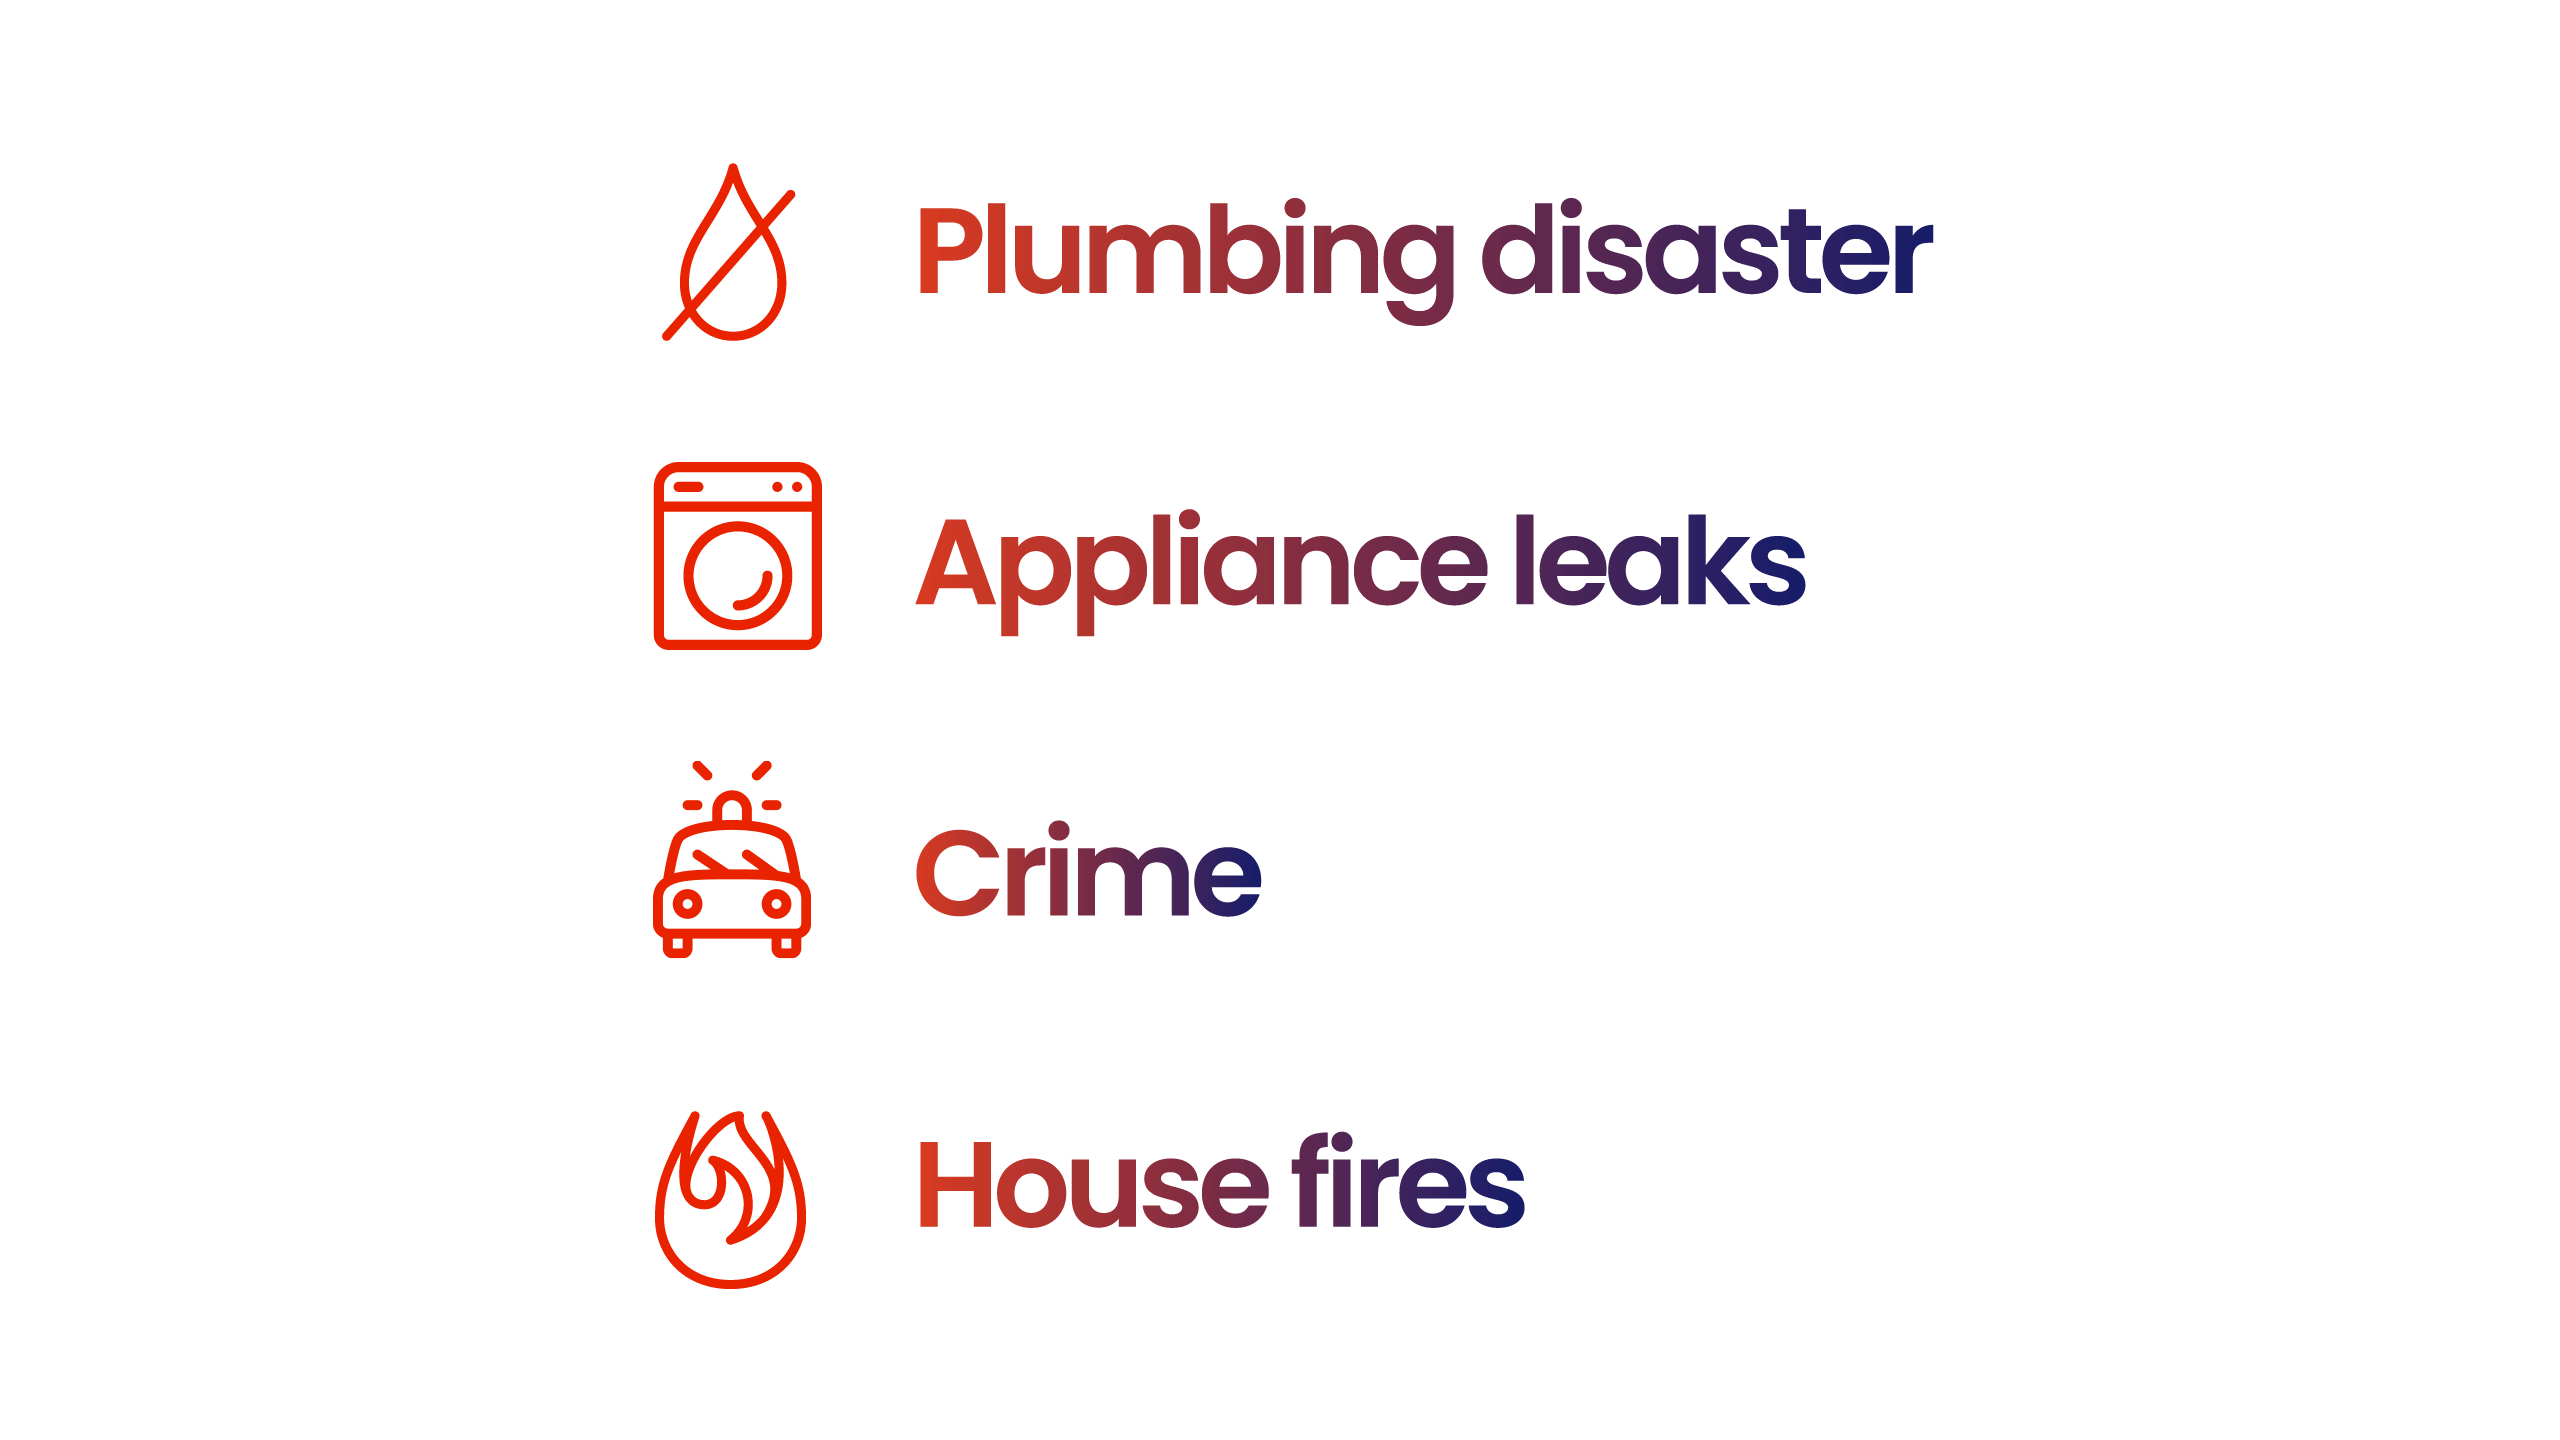 Non-weather hazards - Plumbing disaster, Appliance leaks, Crime, House fires